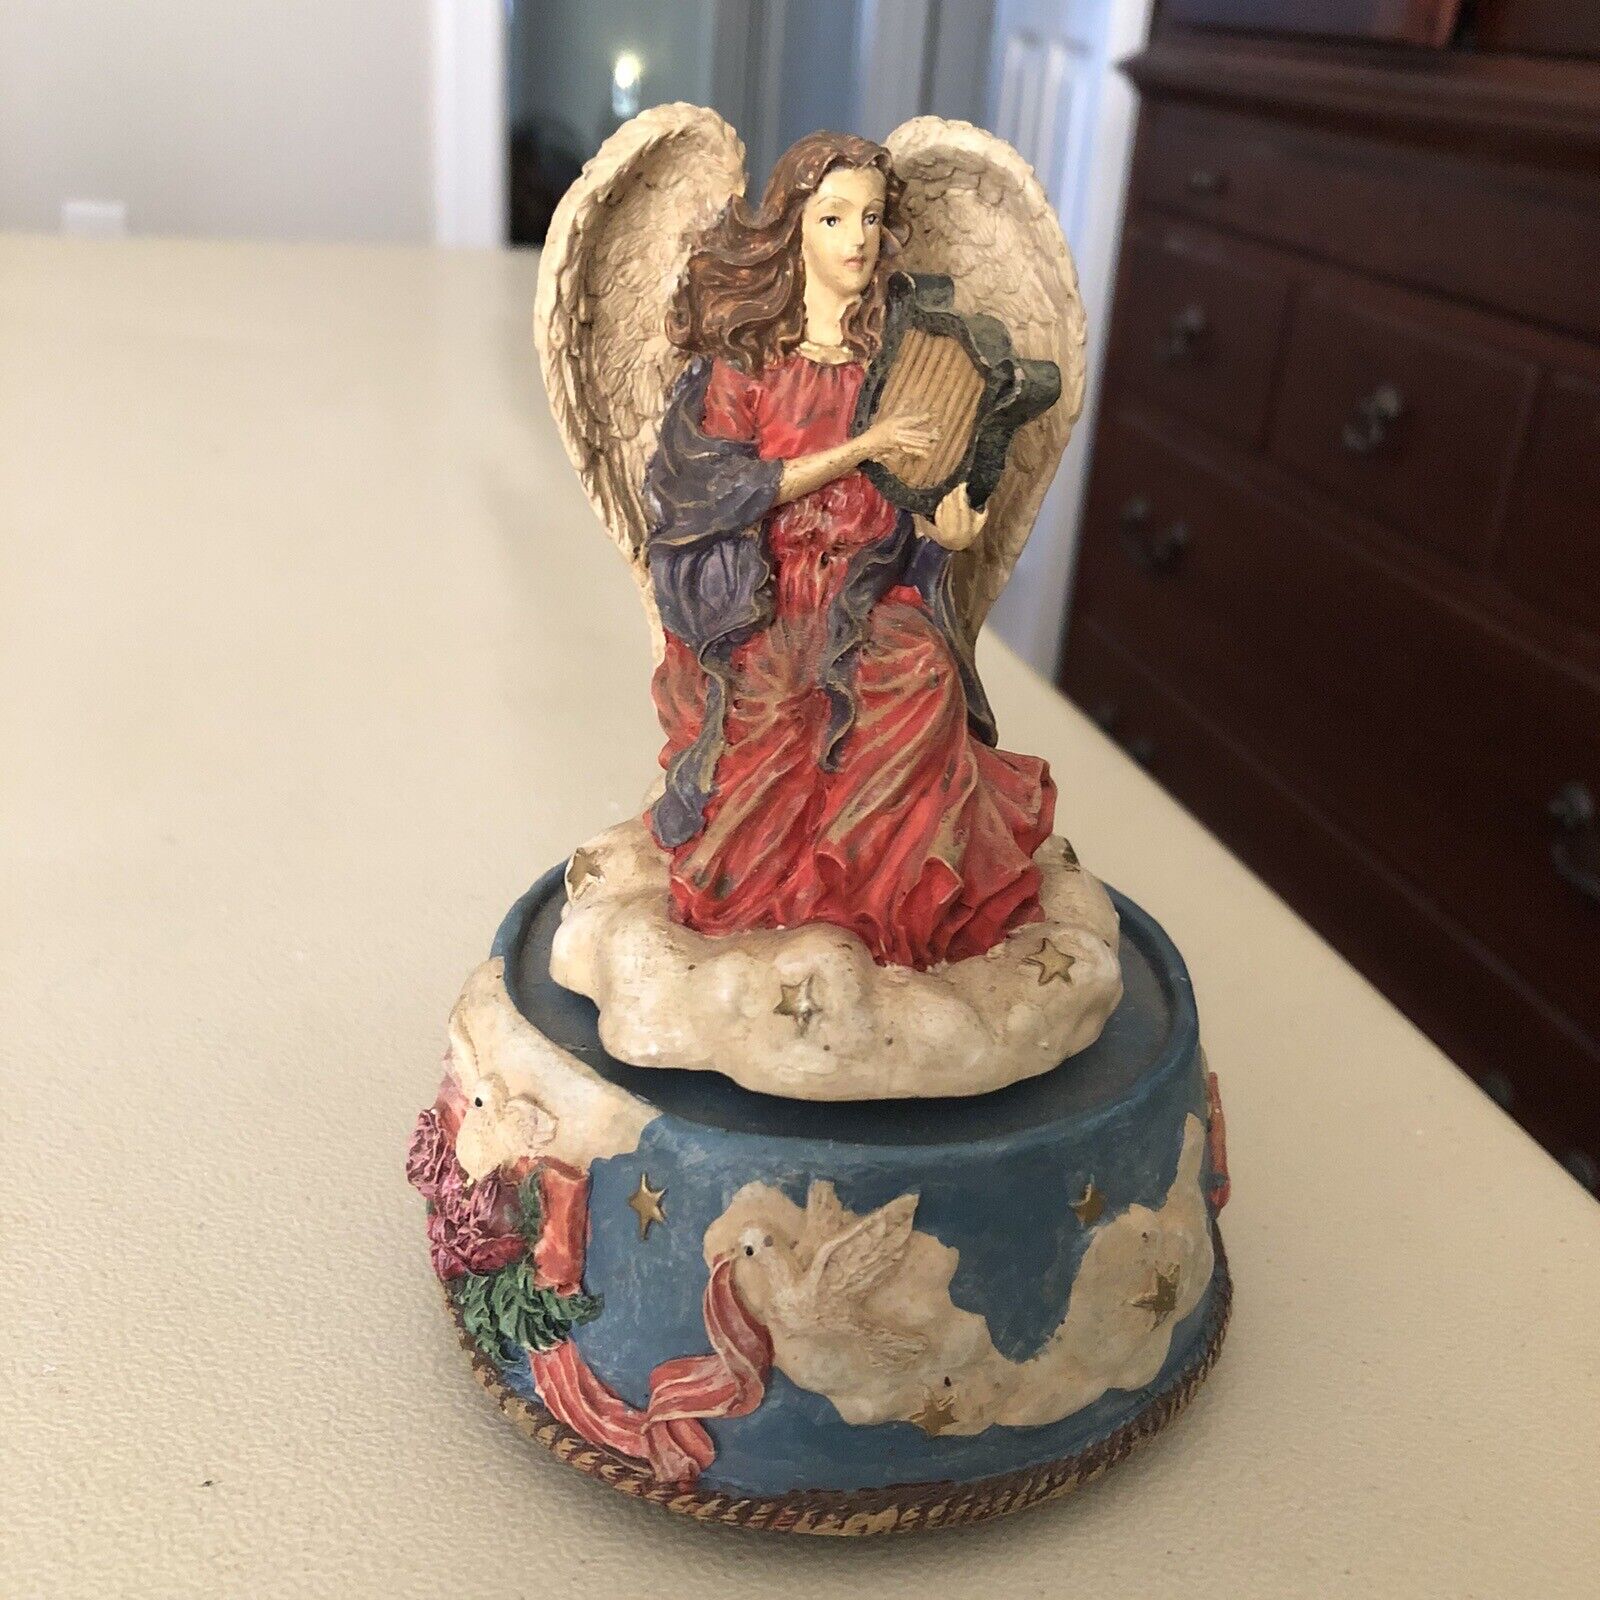 Vintage Angel Music Box With Harp Musical in Clouds Plays - Somewhere My Love